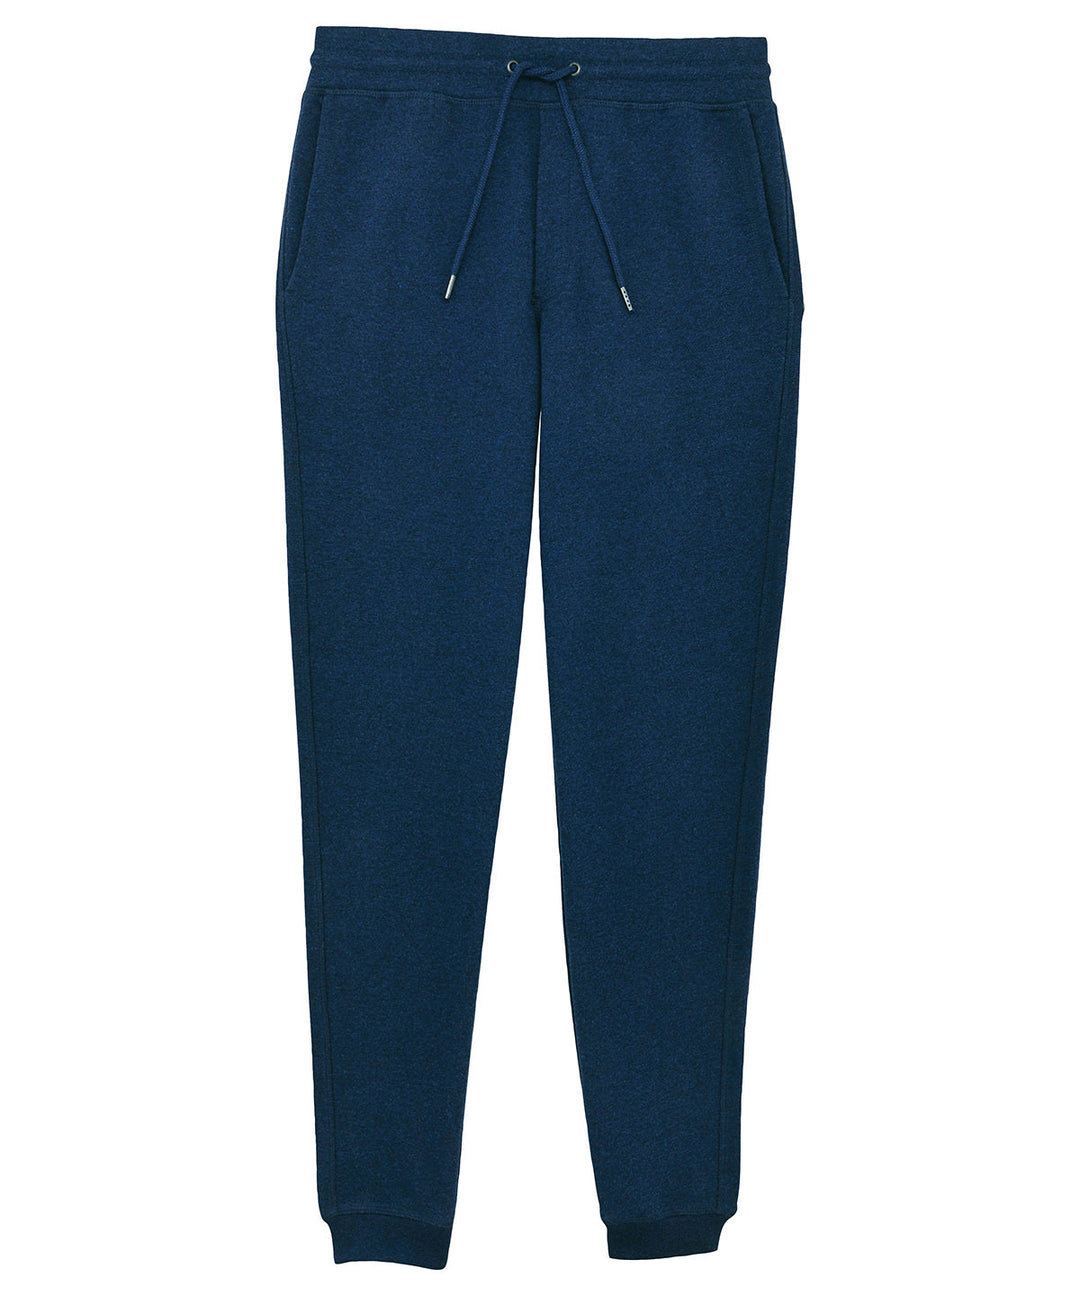 Apres Surf + Sail Chilly Joggers & Shorts Apres Surf + Sail Chilly Bottoms Ralawise 